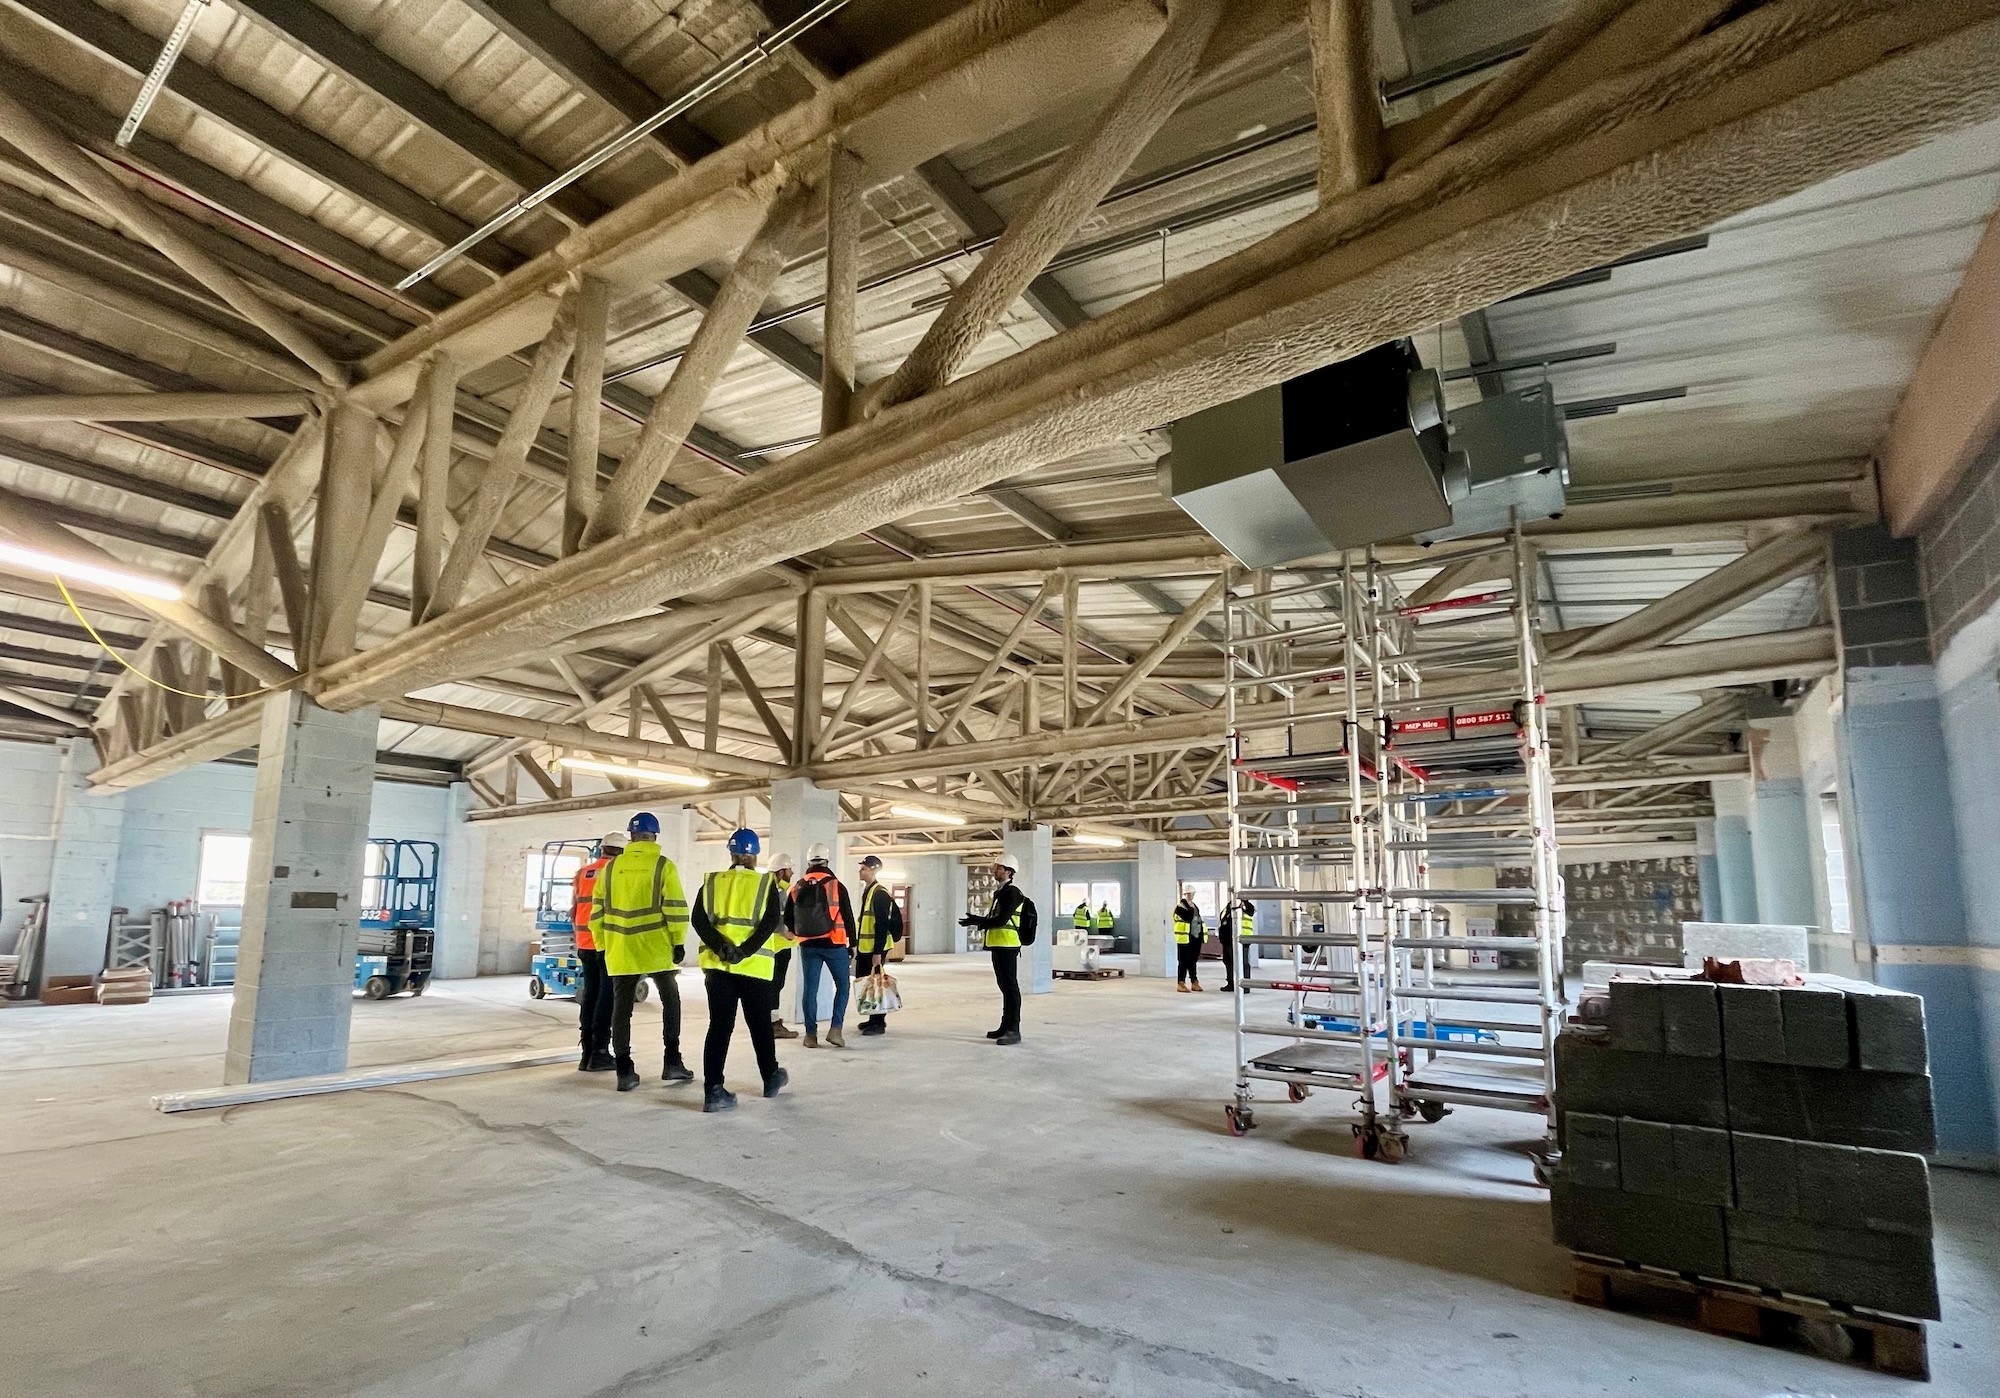 the inside of a building under construction with people wearing high vis jackets and hard hats in the background